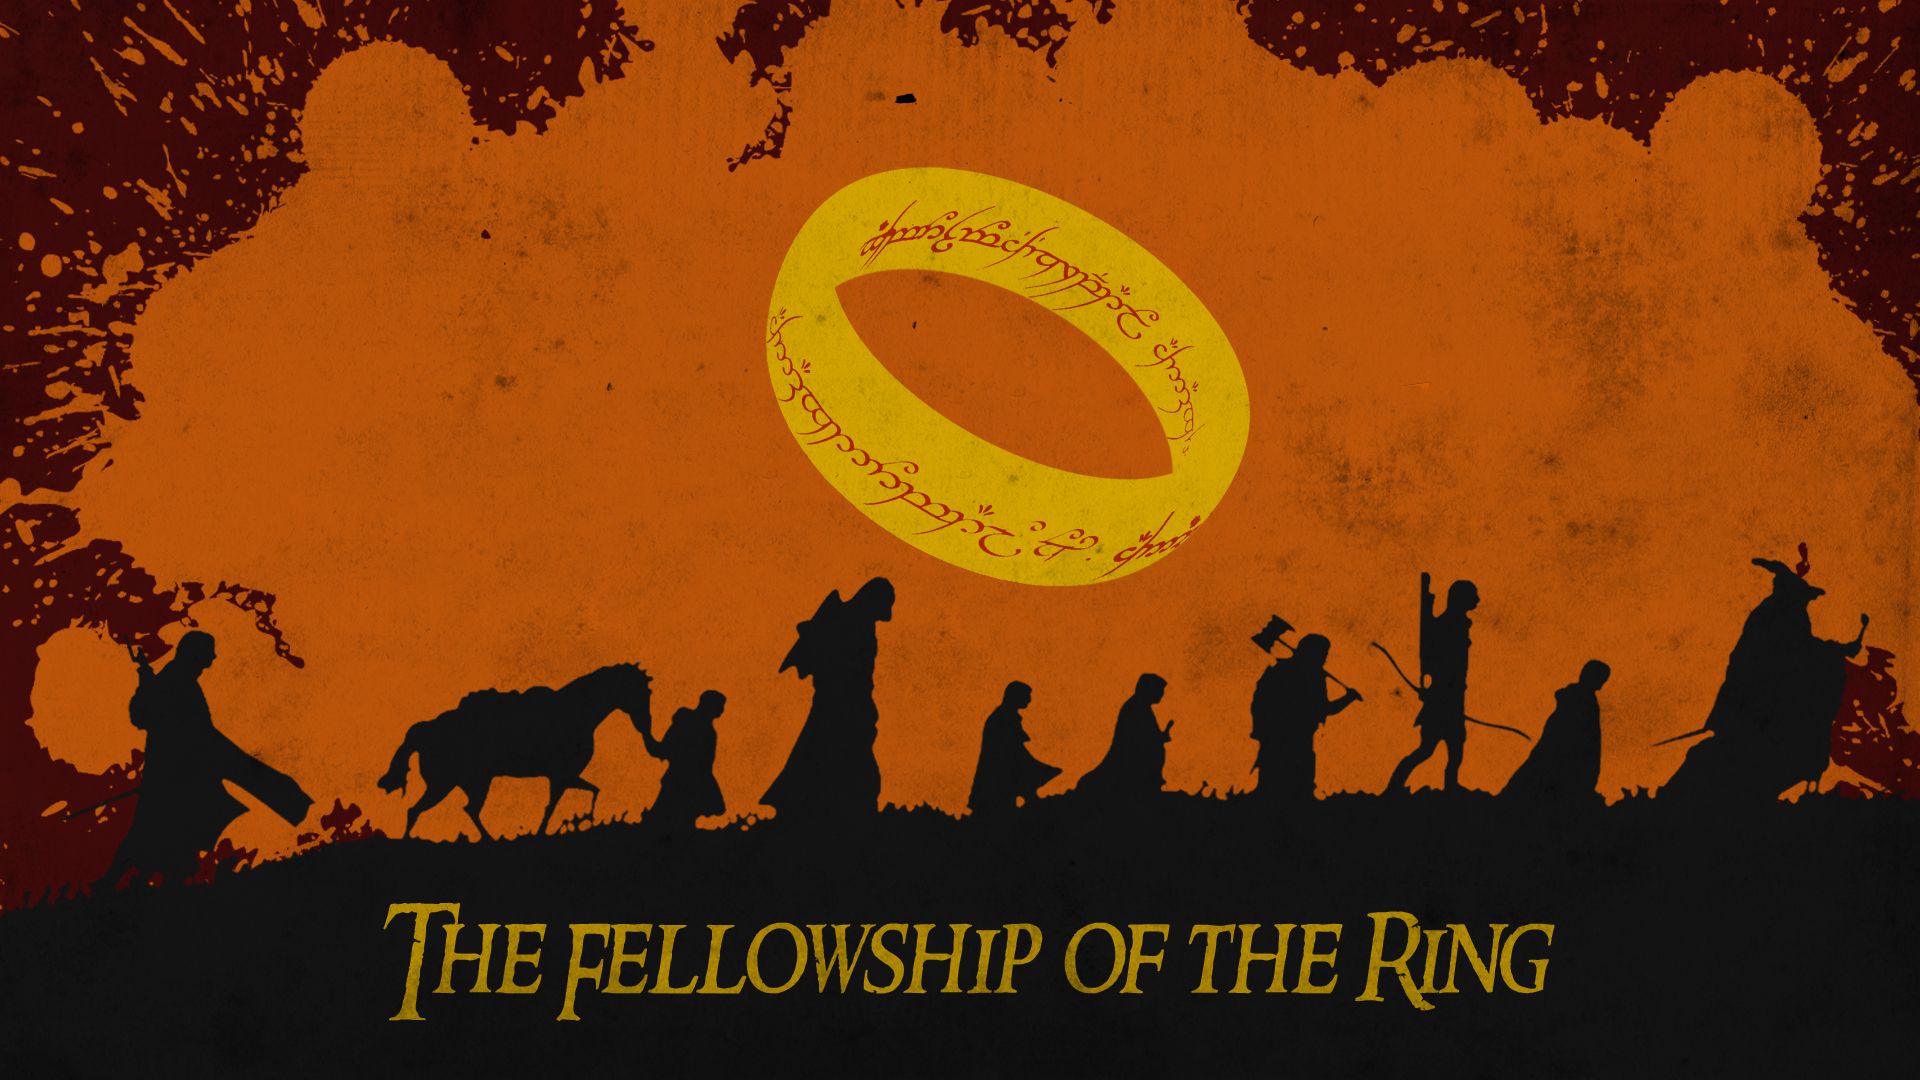 The Fellowship of the Ring Wallpaper. Spring Wallpaper, Pretty Spring Wallpaper and Inspiring Wallpaper